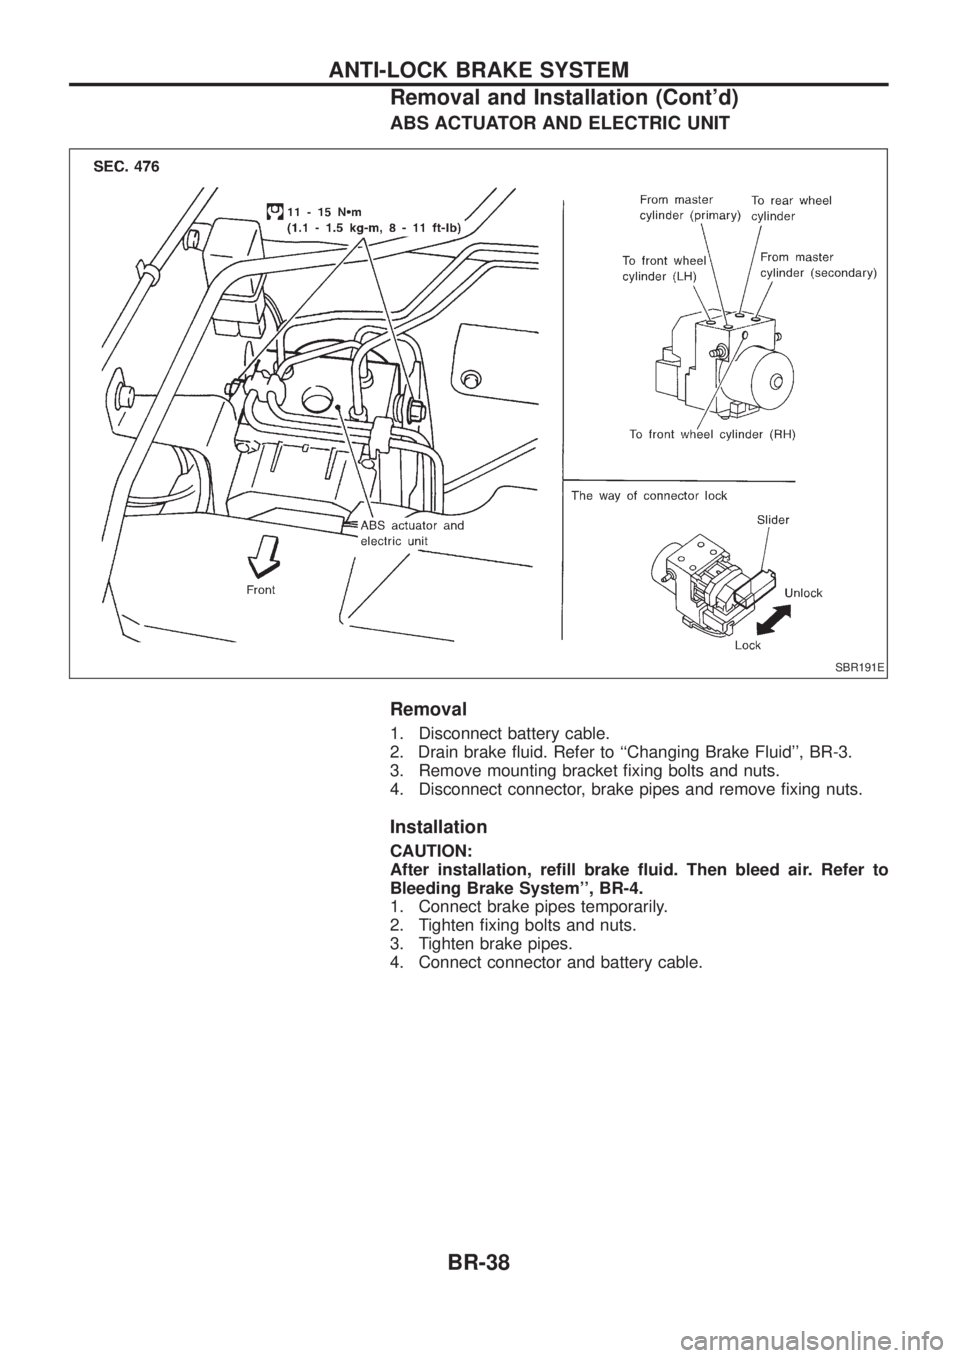 NISSAN PATROL 2006  Service Manual ABS ACTUATOR AND ELECTRIC UNIT
Removal
1. Disconnect battery cable.
2. Drain brake ¯uid. Refer to ``Changing Brake Fluid, BR-3.
3. Remove mounting bracket ®xing bolts and nuts.
4. Disconnect conne